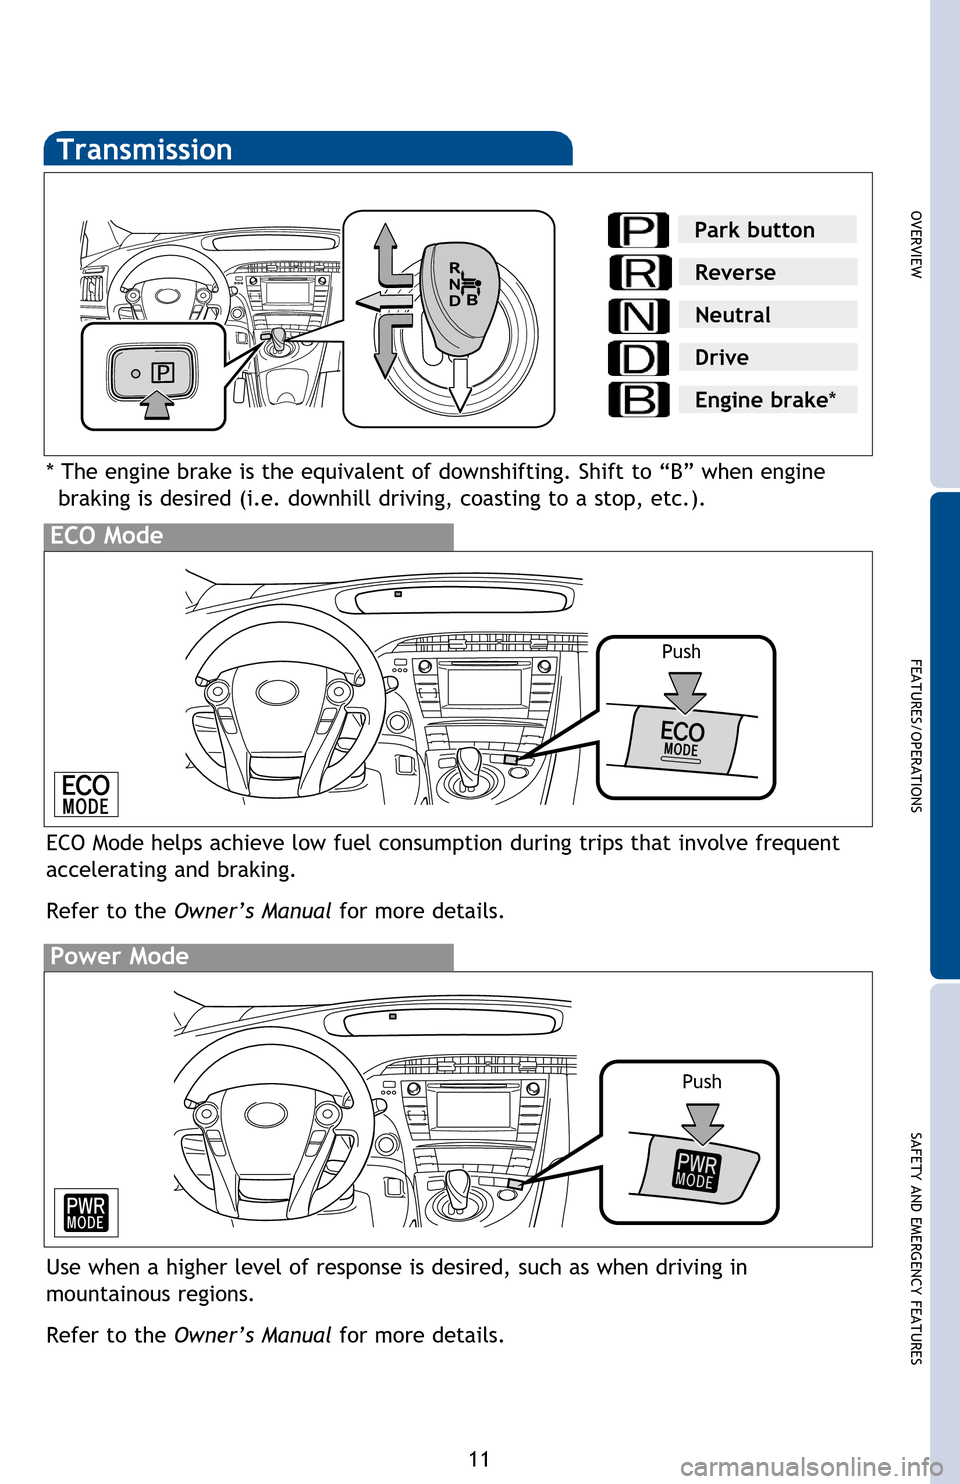 TOYOTA PRIUS 2013 3.G Quick Reference Guide OVERVIEW
FEATURES/OPERATIONS
SAFETY AND EMERGENCY FEATURES
11
Transmission
* 
The engine brake is the equivalent of downshifting. Shift to “B” when engine 
braking is desired (i.e. downhill drivin